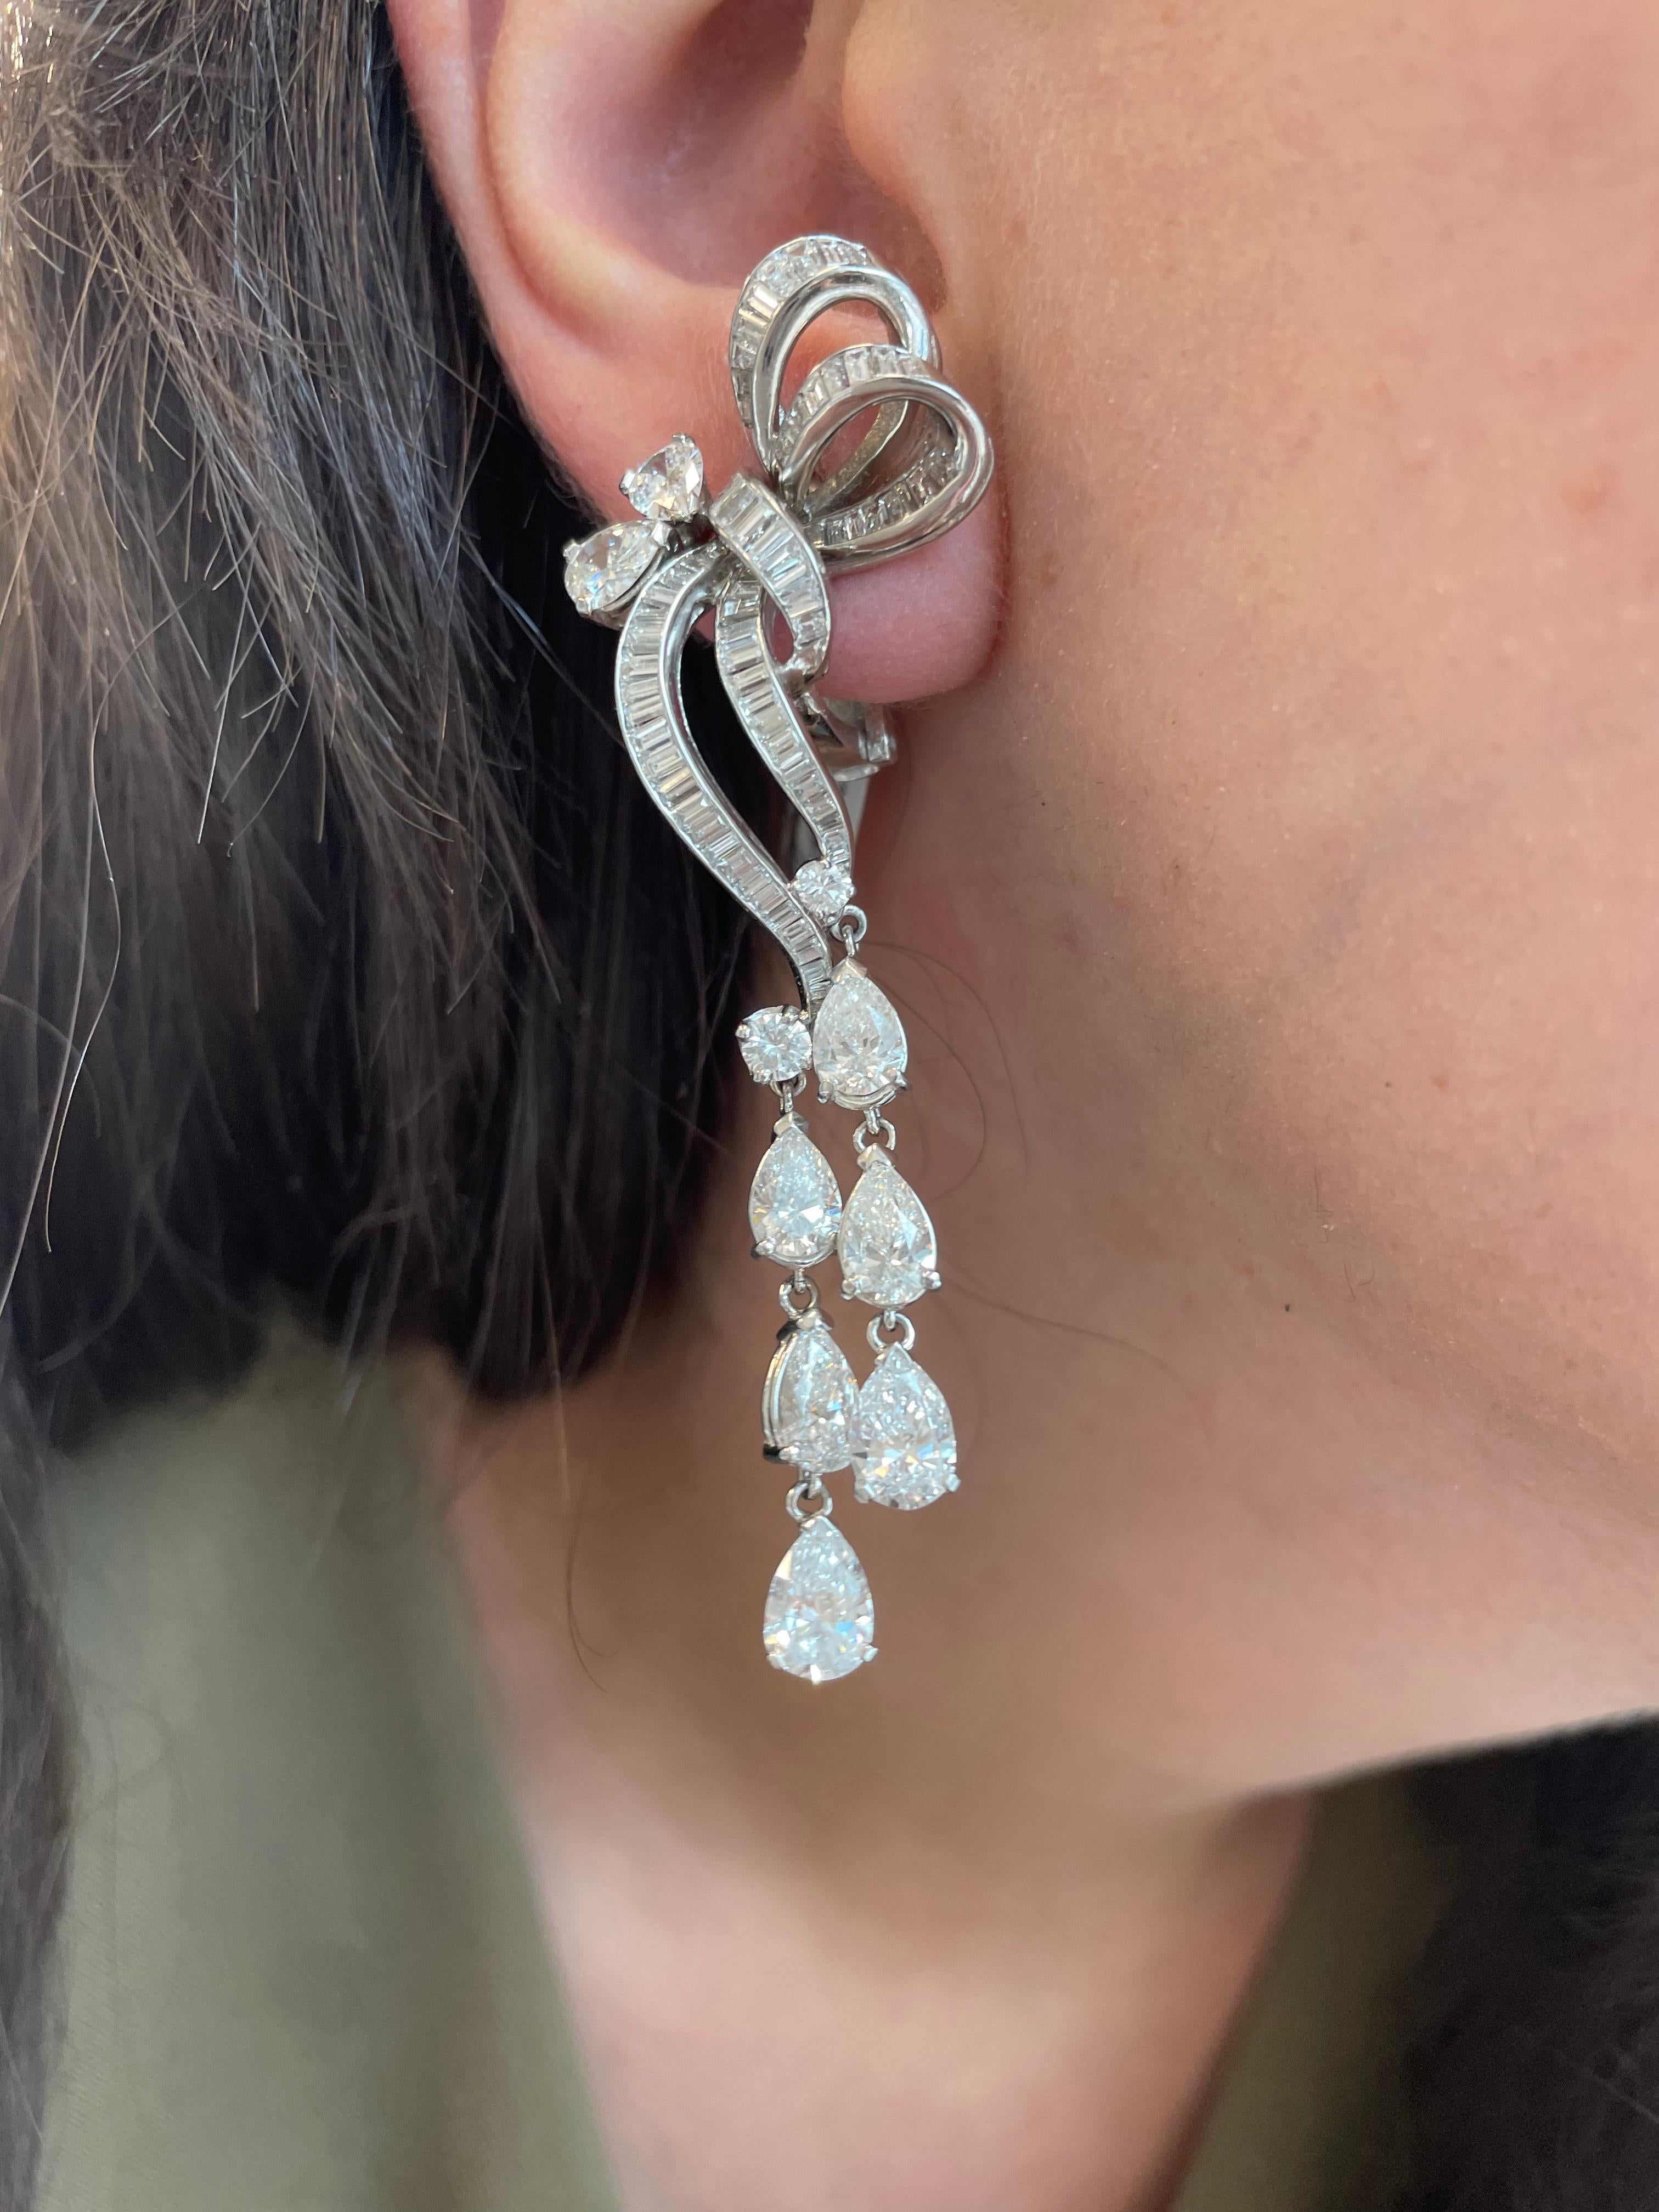 Stunning vintage chandelier high jewelry earrings. Circa 1960's with modernly added bottom pear shape diamonds .
Approximately 11.95 carats of pear, baguette and round brilliant diamonds. Approximately G/H color grade and VS clarity grade. Platinum,